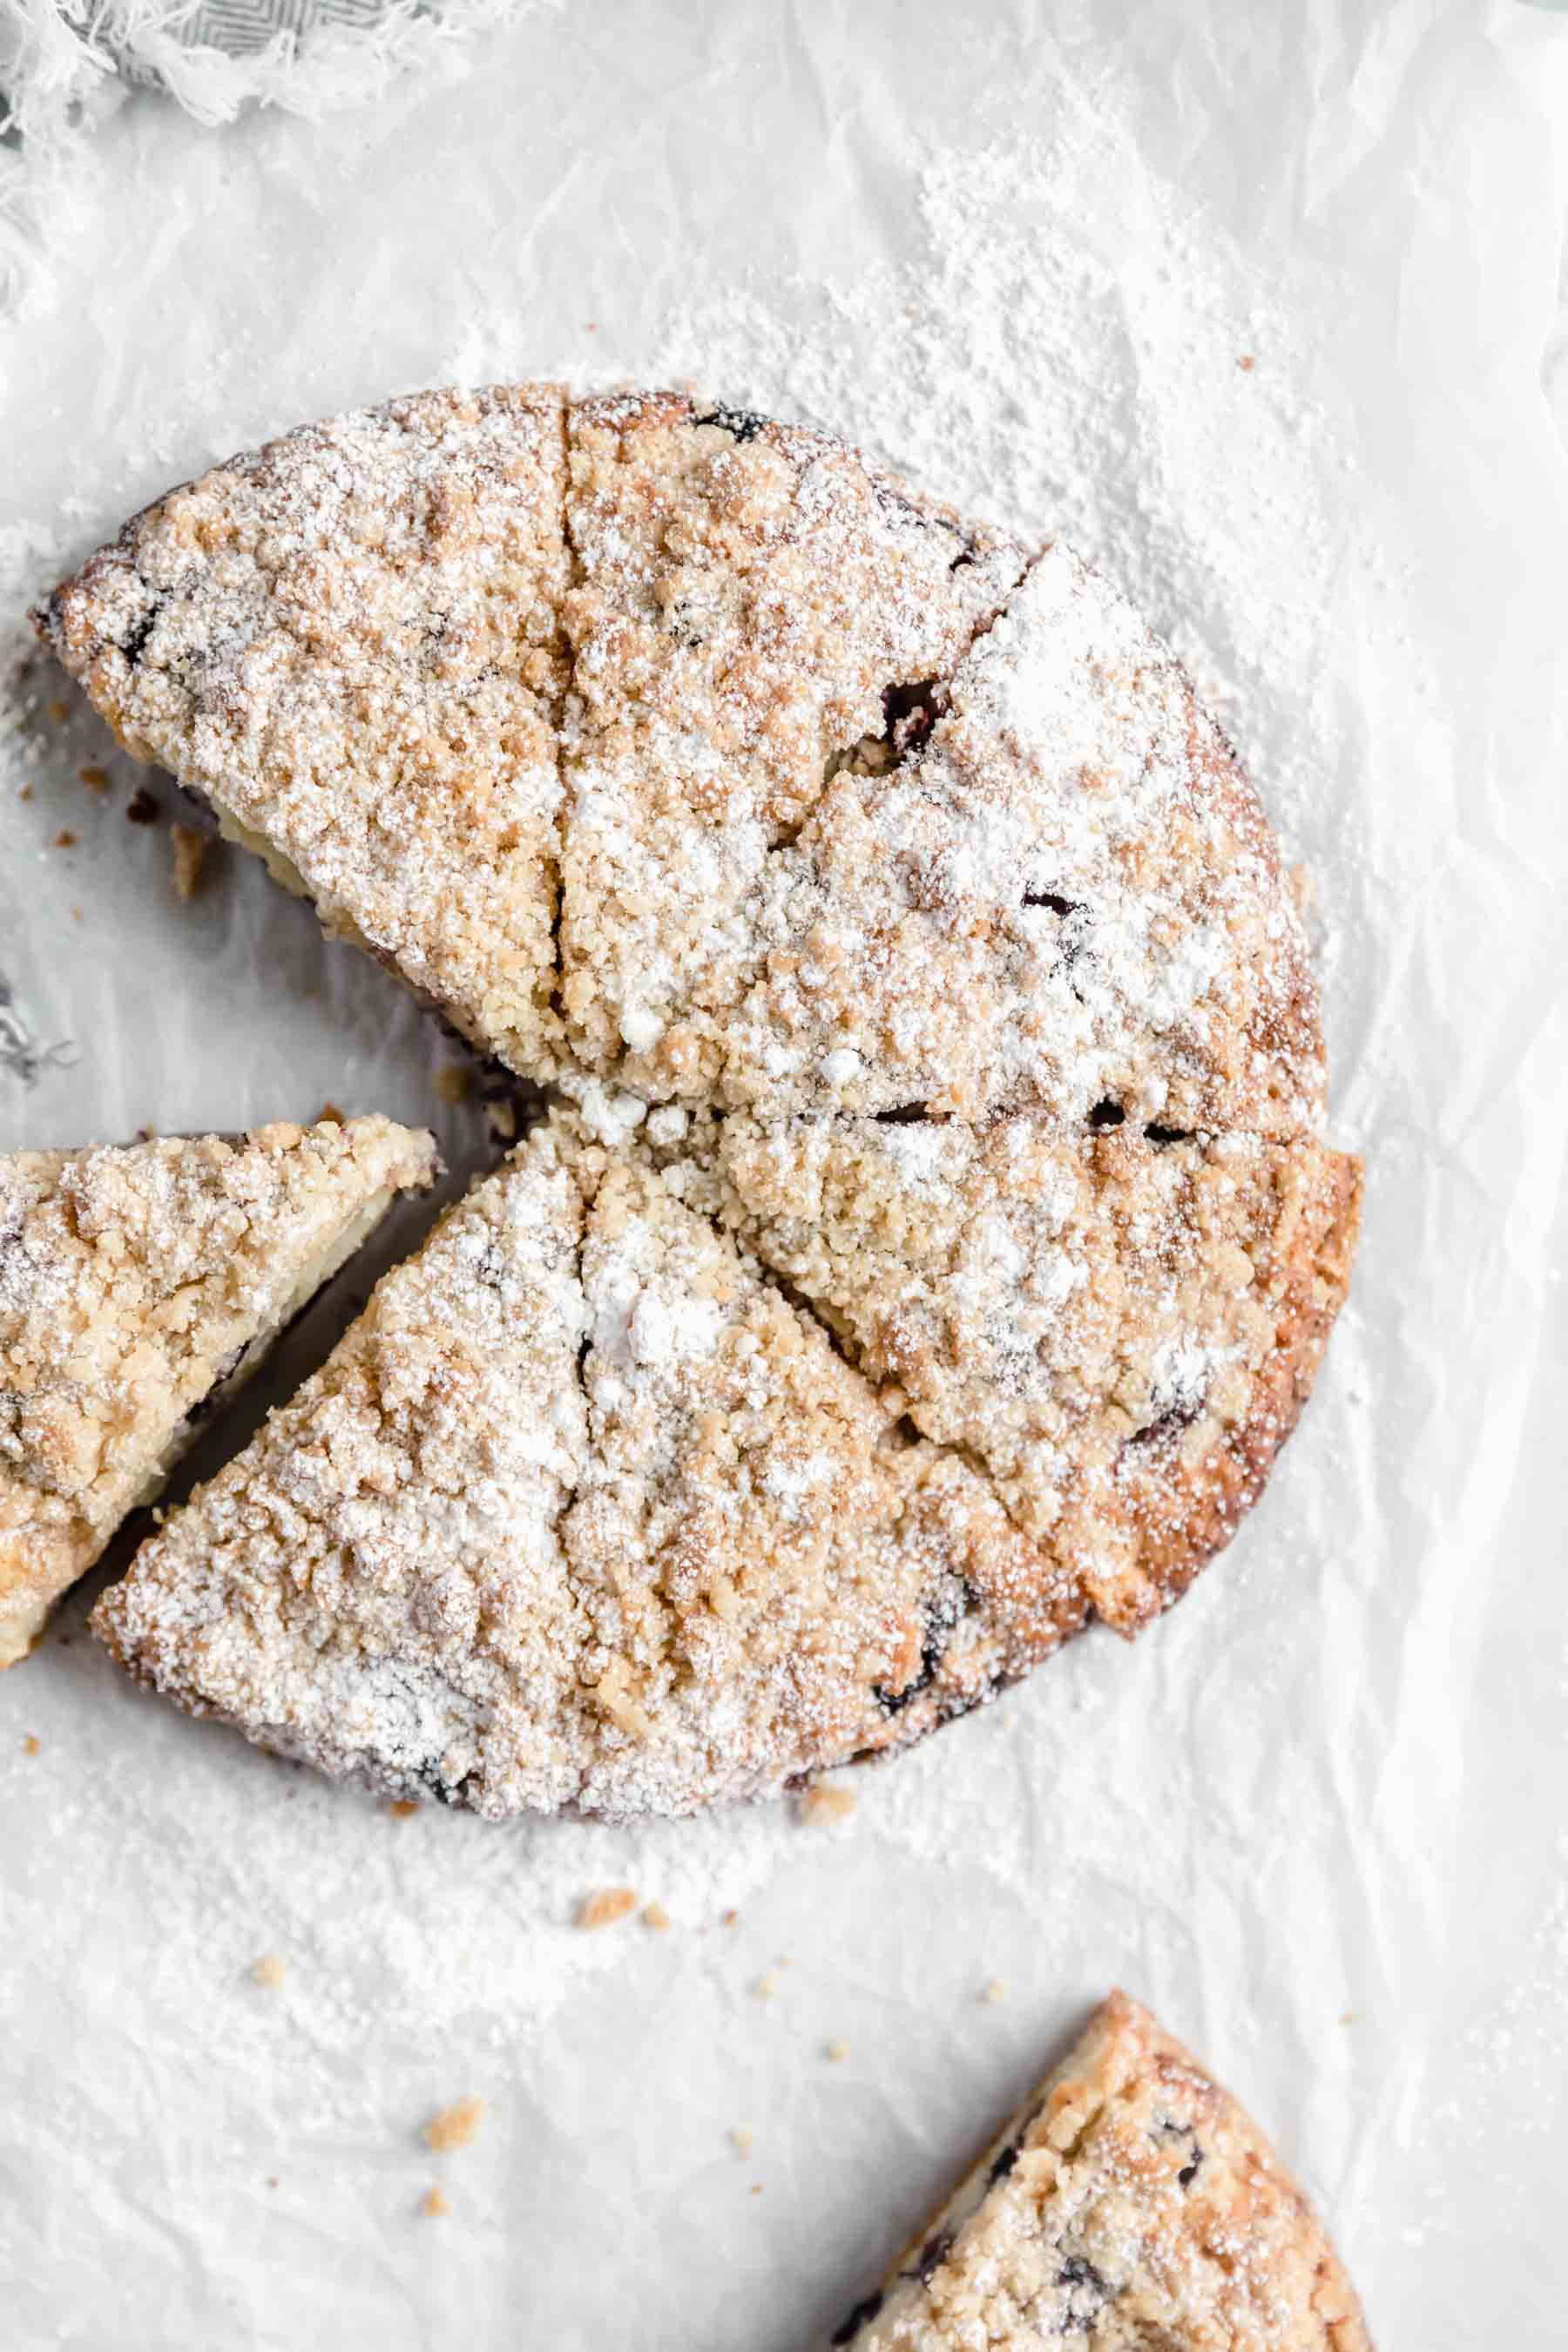 Blueberry scones with a decadent streusel topping. These blueberry streusel scones are perfect for mother's day!